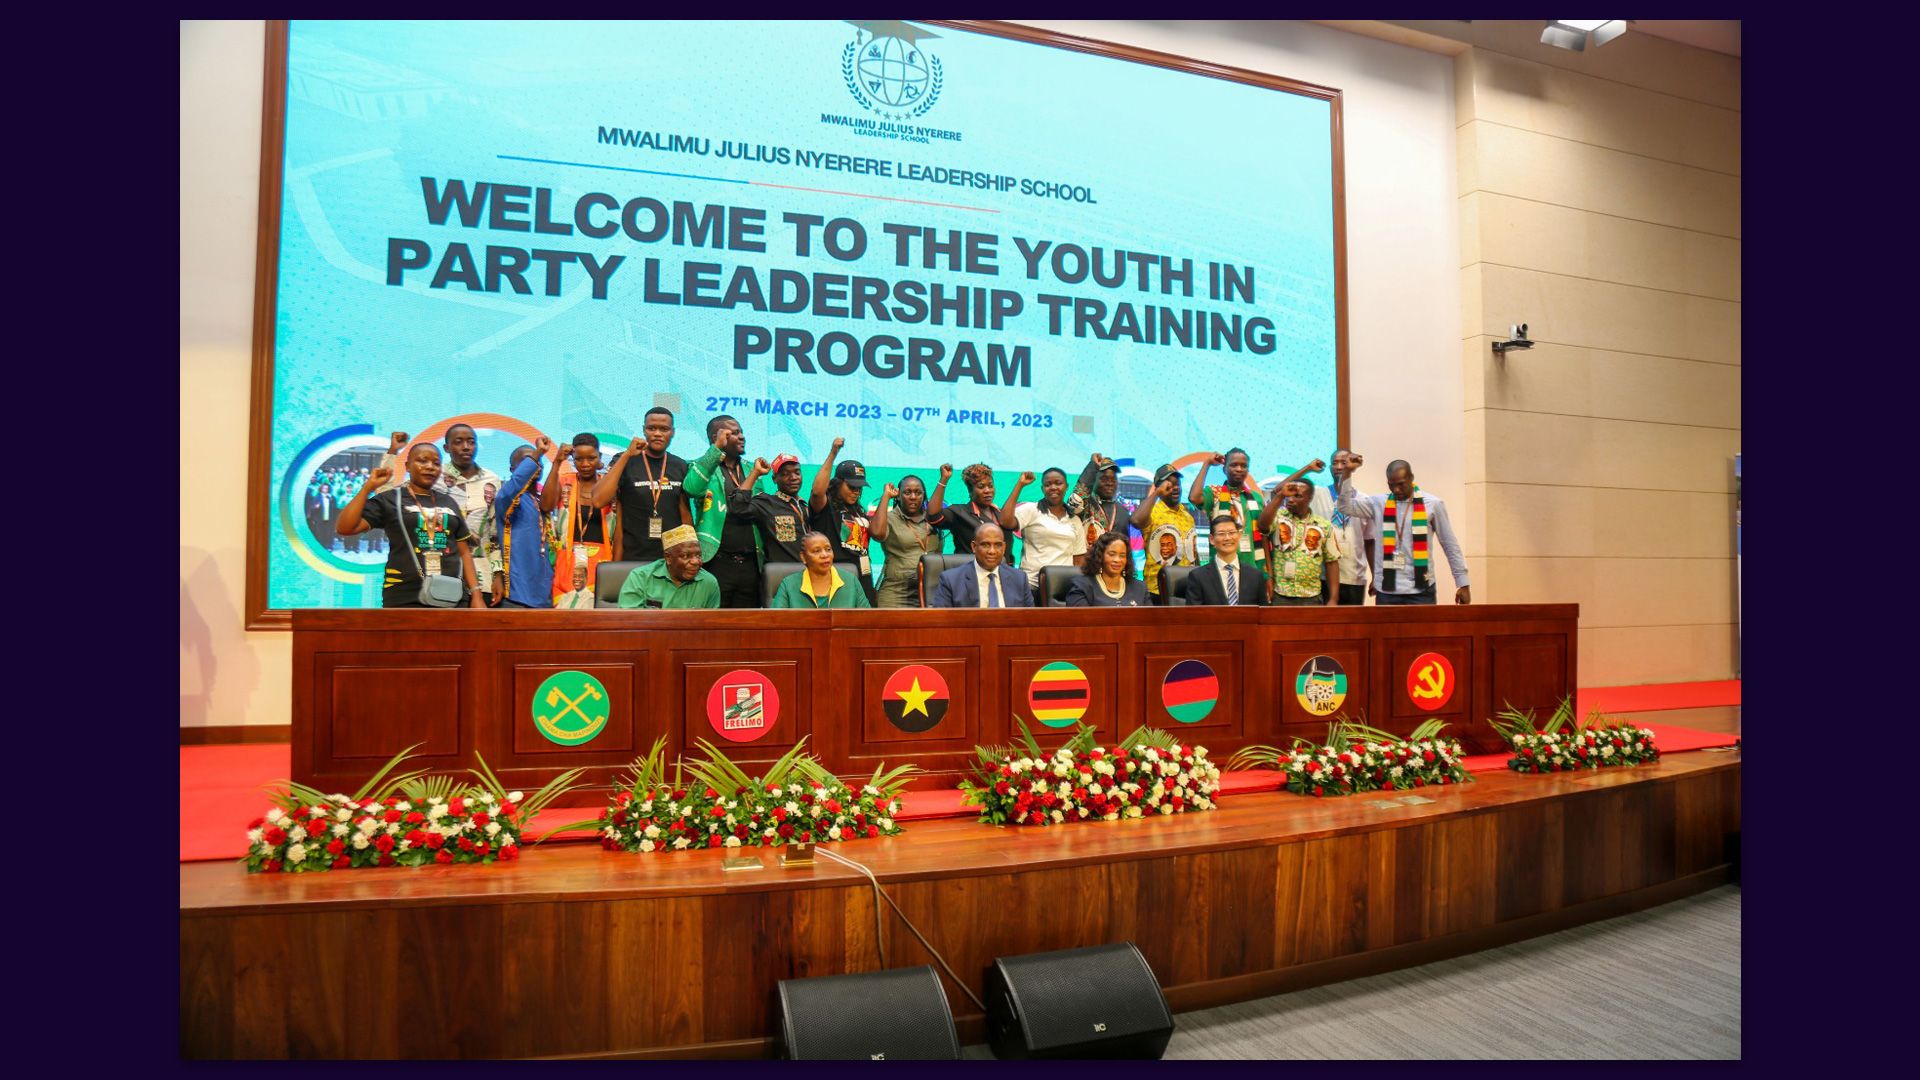 Party leaders sit on stage. Behind them are participants with their fists raised, and a presentation slide that reads, “Welcome to the youth in party leadership training program; March 27, 2023 to April 7, 2023.”